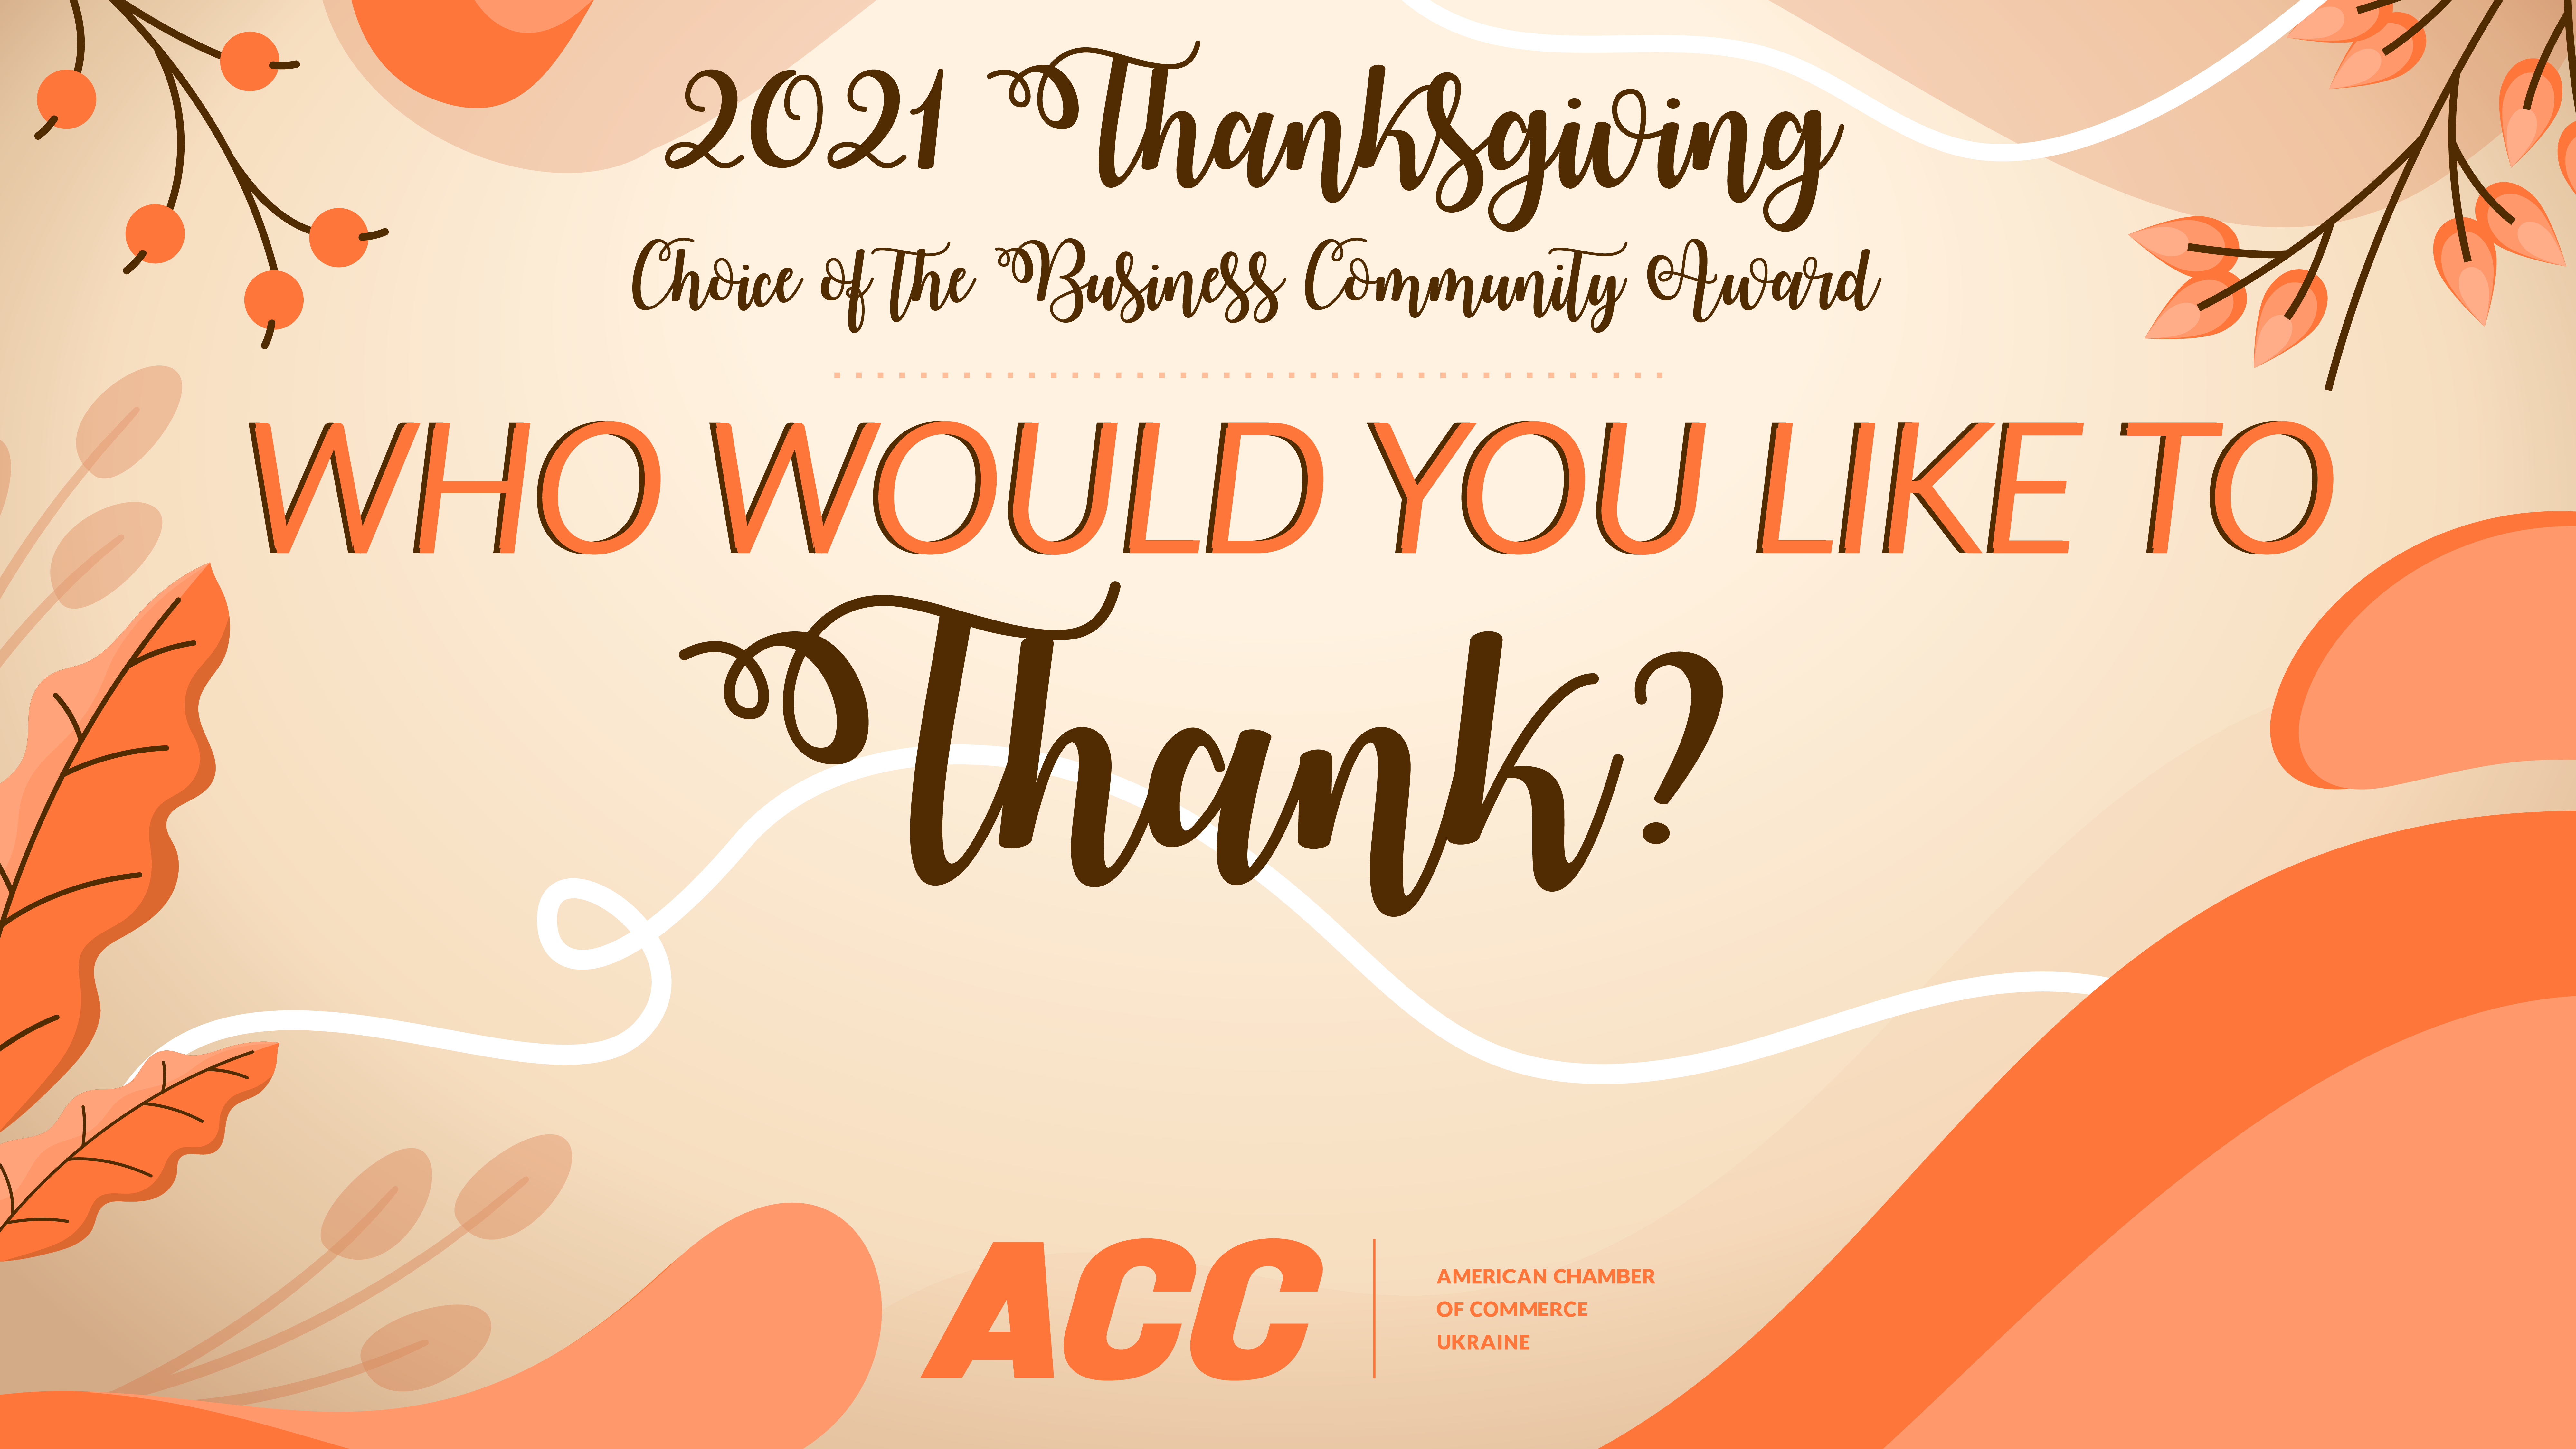 Thanksgiving Award 2021 – Who Would You Like to Thank?